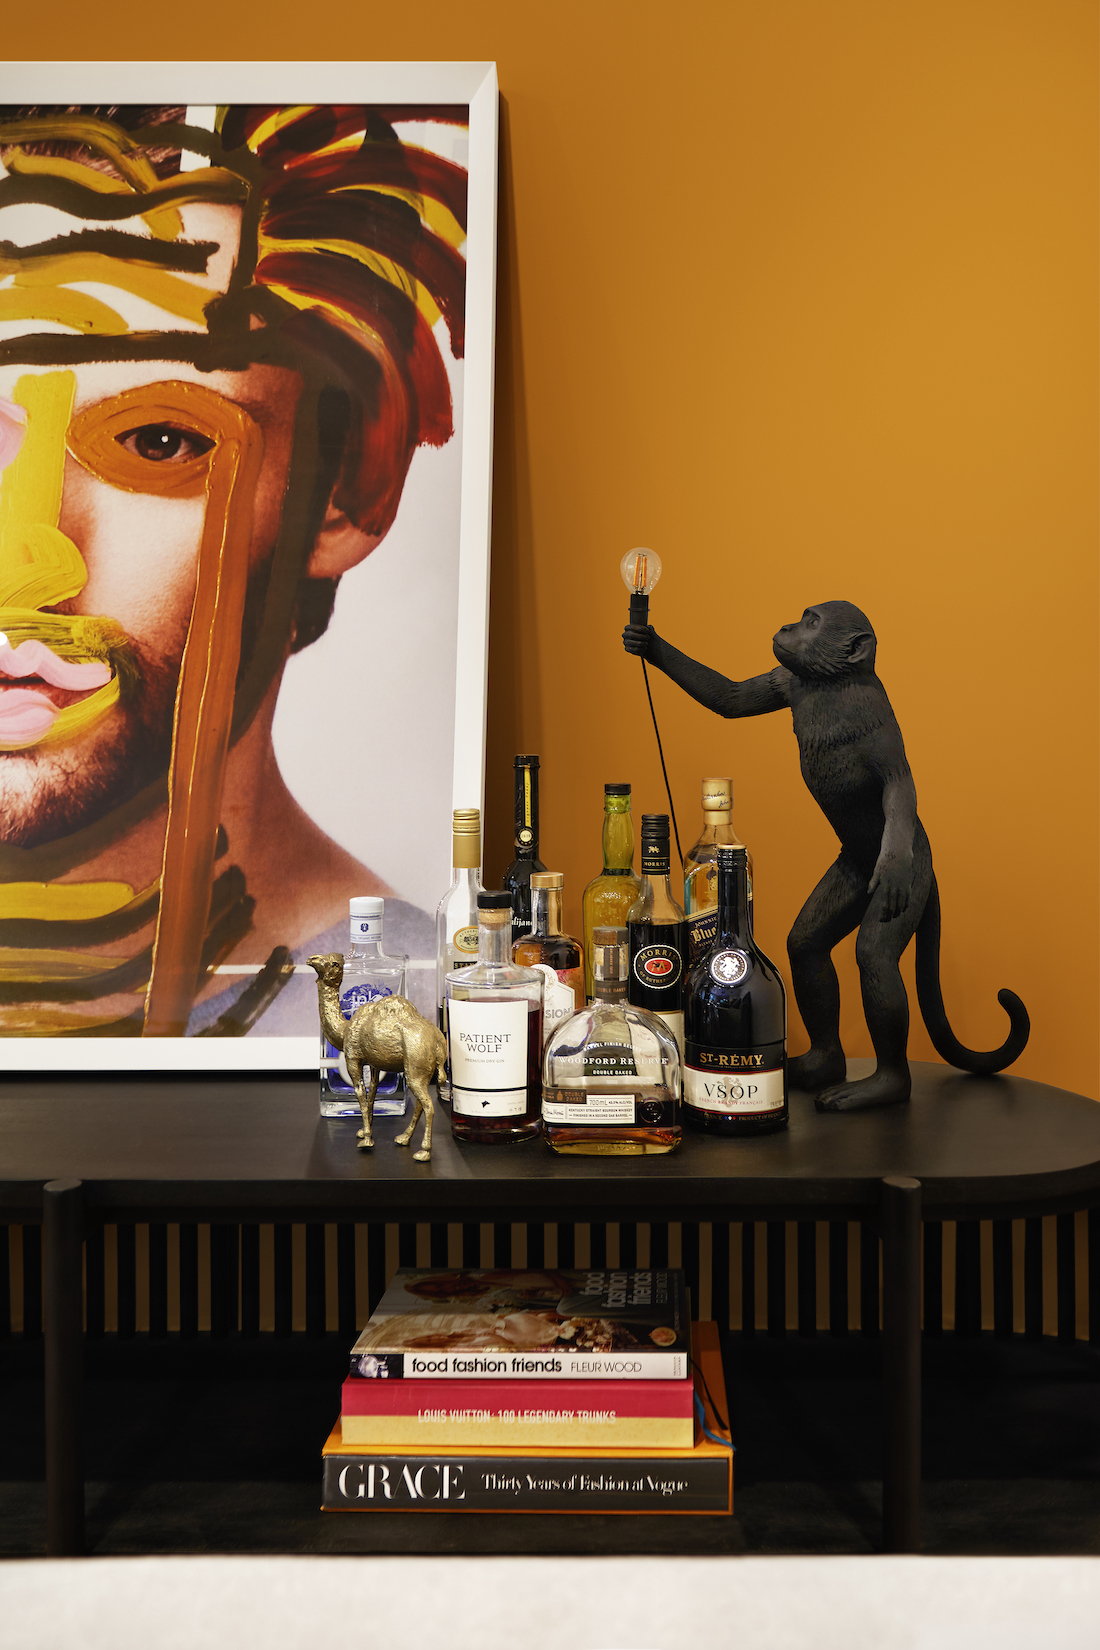 Monkey lamp in bar area with mustard yellow wall